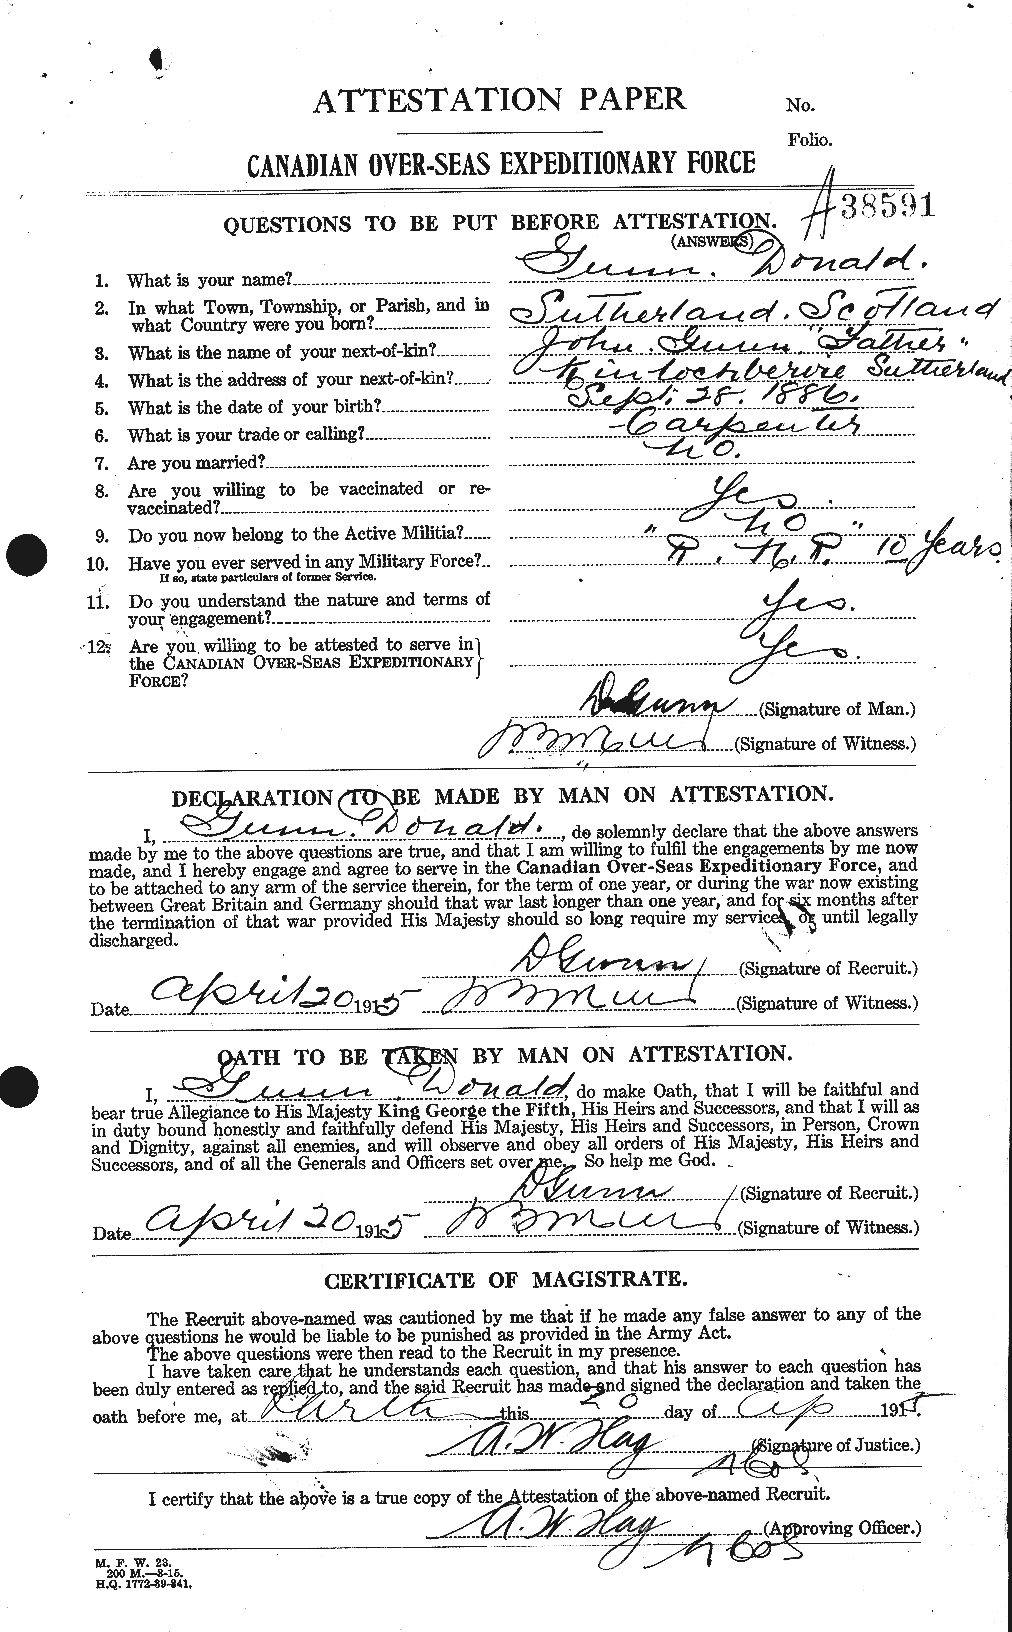 Personnel Records of the First World War - CEF 368028a